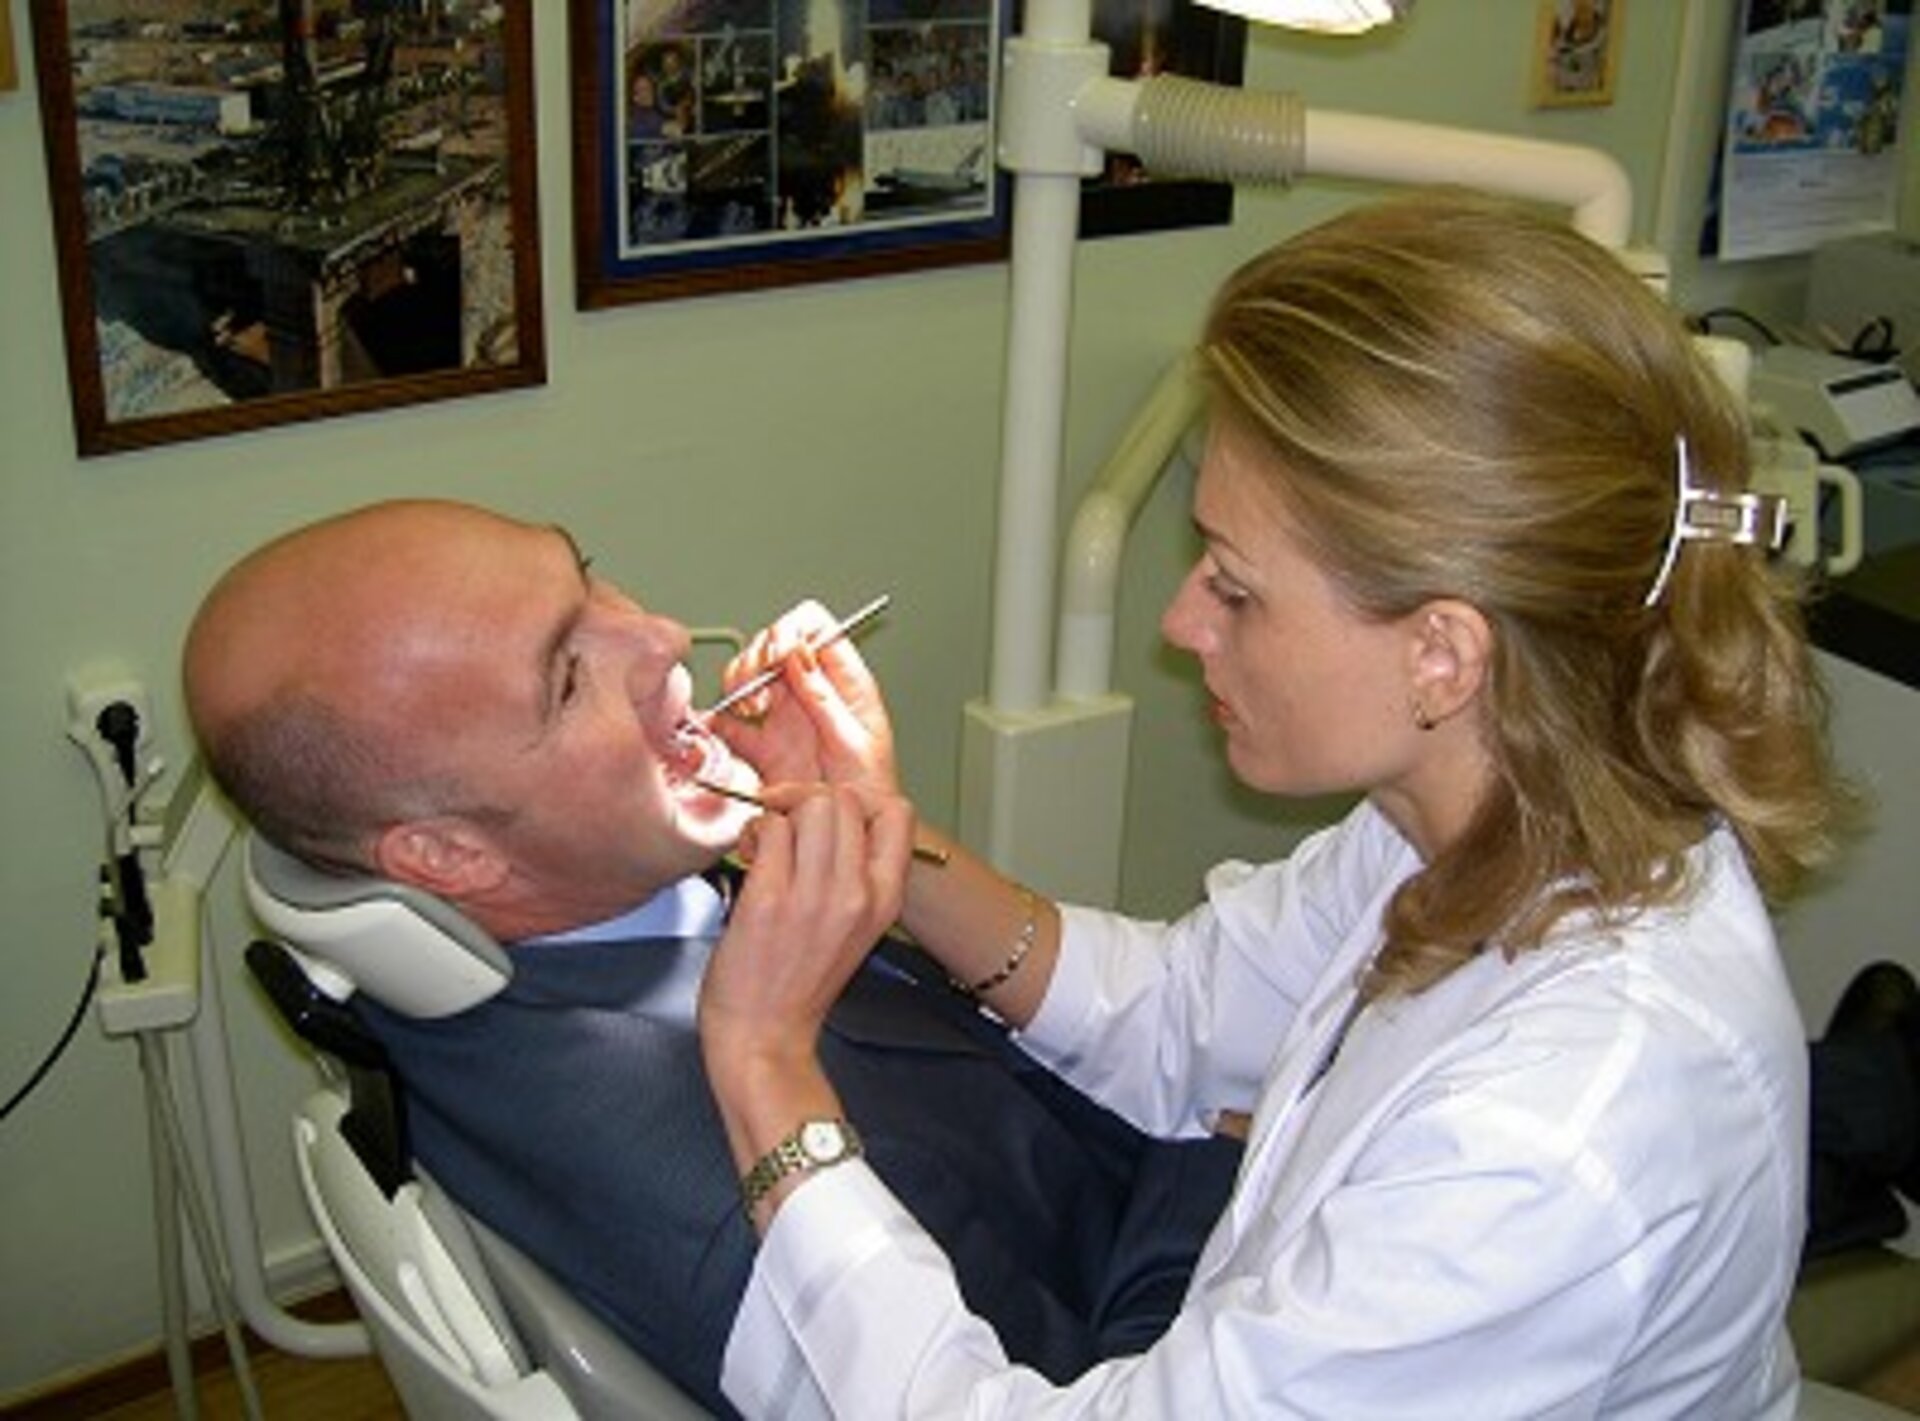 A dental check-up is also part of the medical